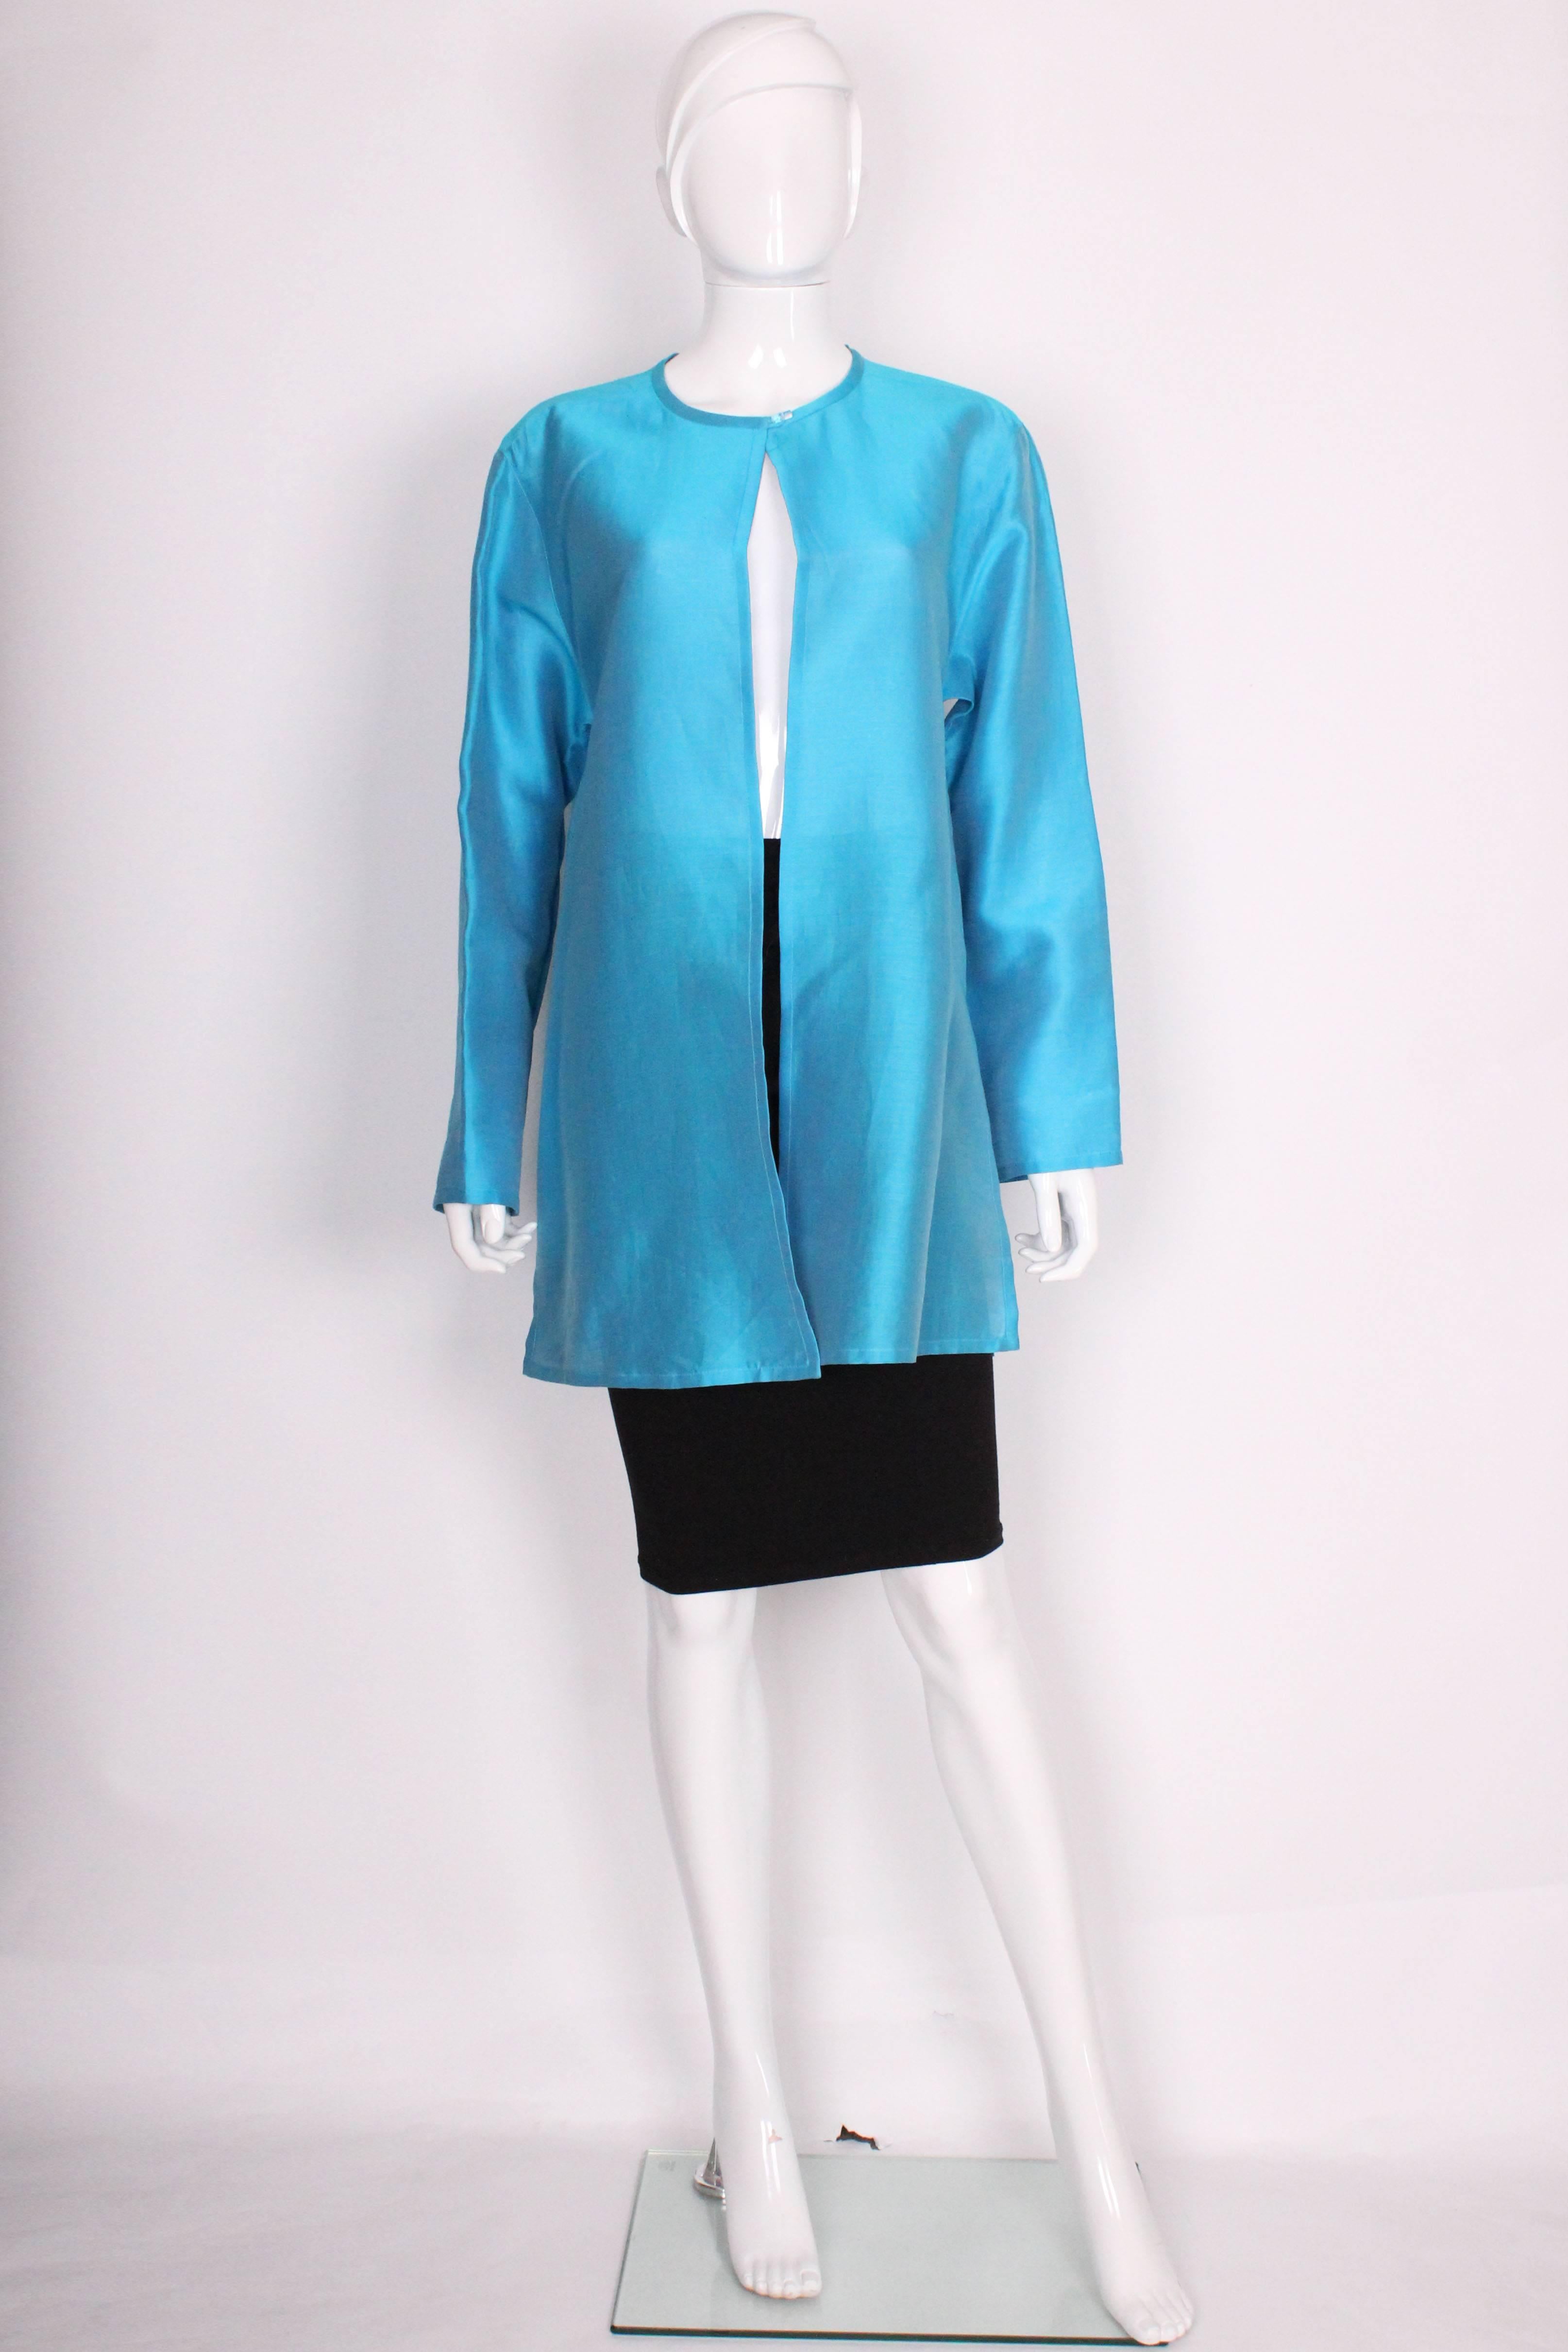 A stunning jacket by British designer Jean Muir.In an stunning turquoise colour with dark blue lining, this jacket will brighten up any outfit. The jacket has a round collar,with a one button fastening at the neck. There is a 11 1/2 slit on either